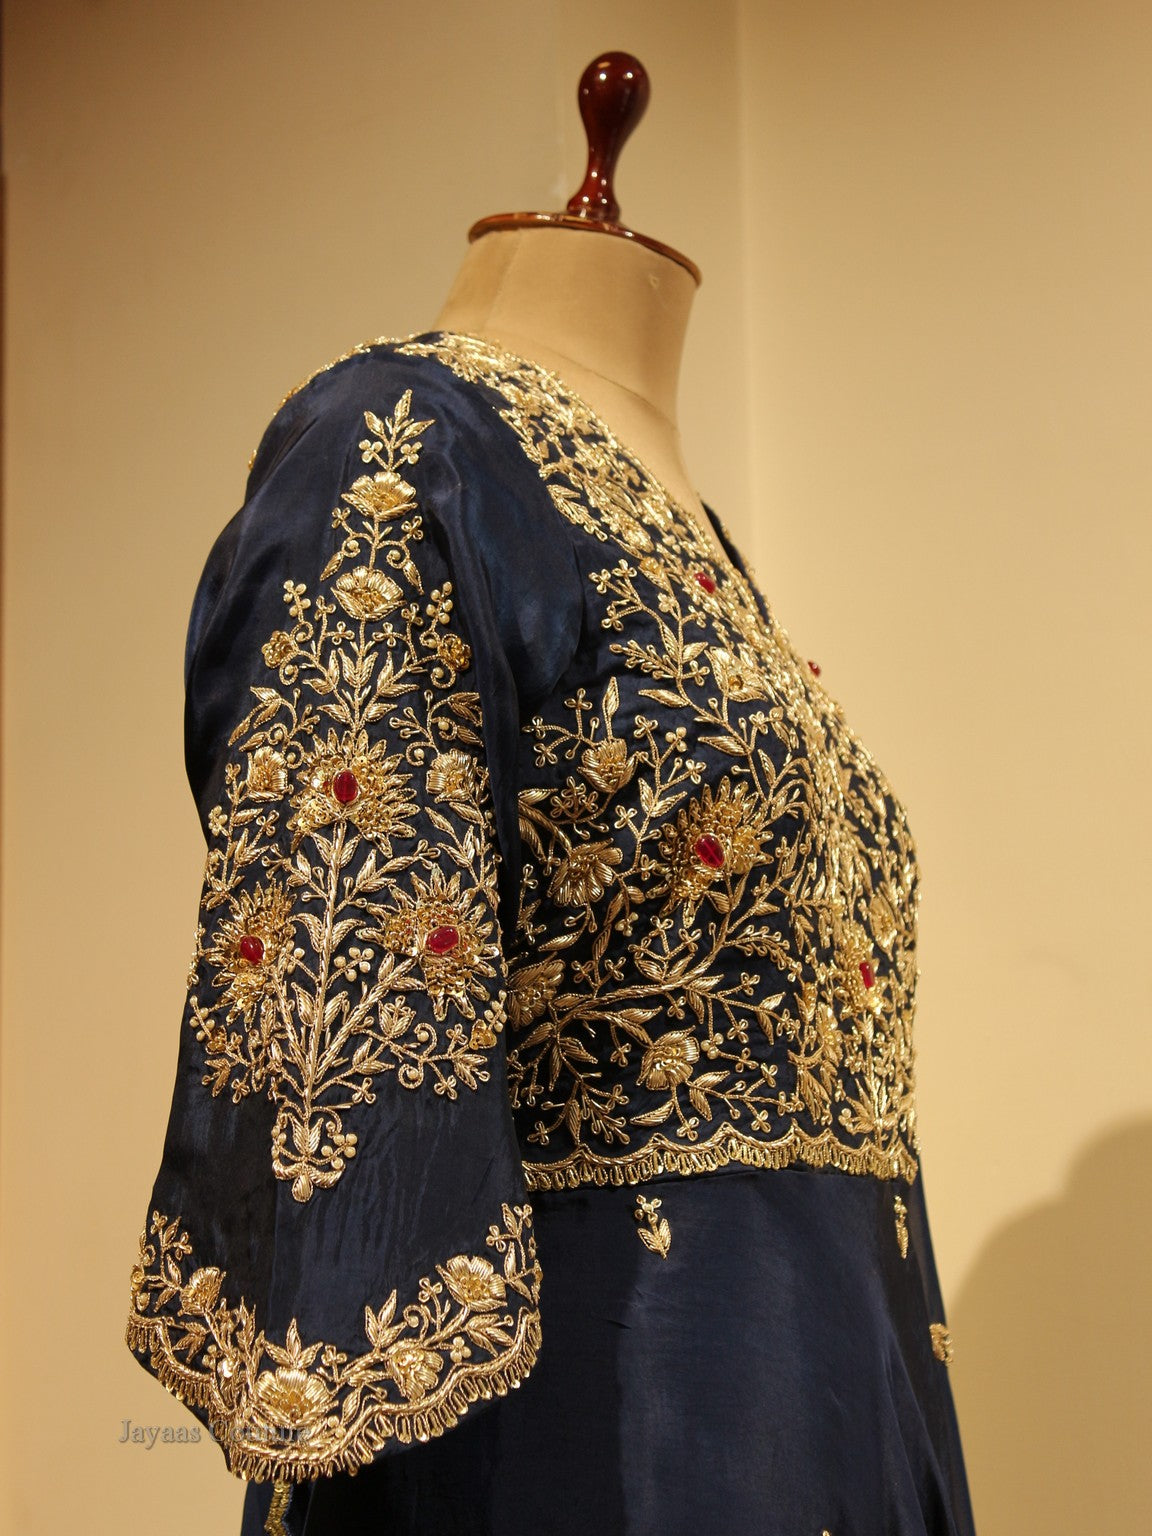 Blue gown with dupatta